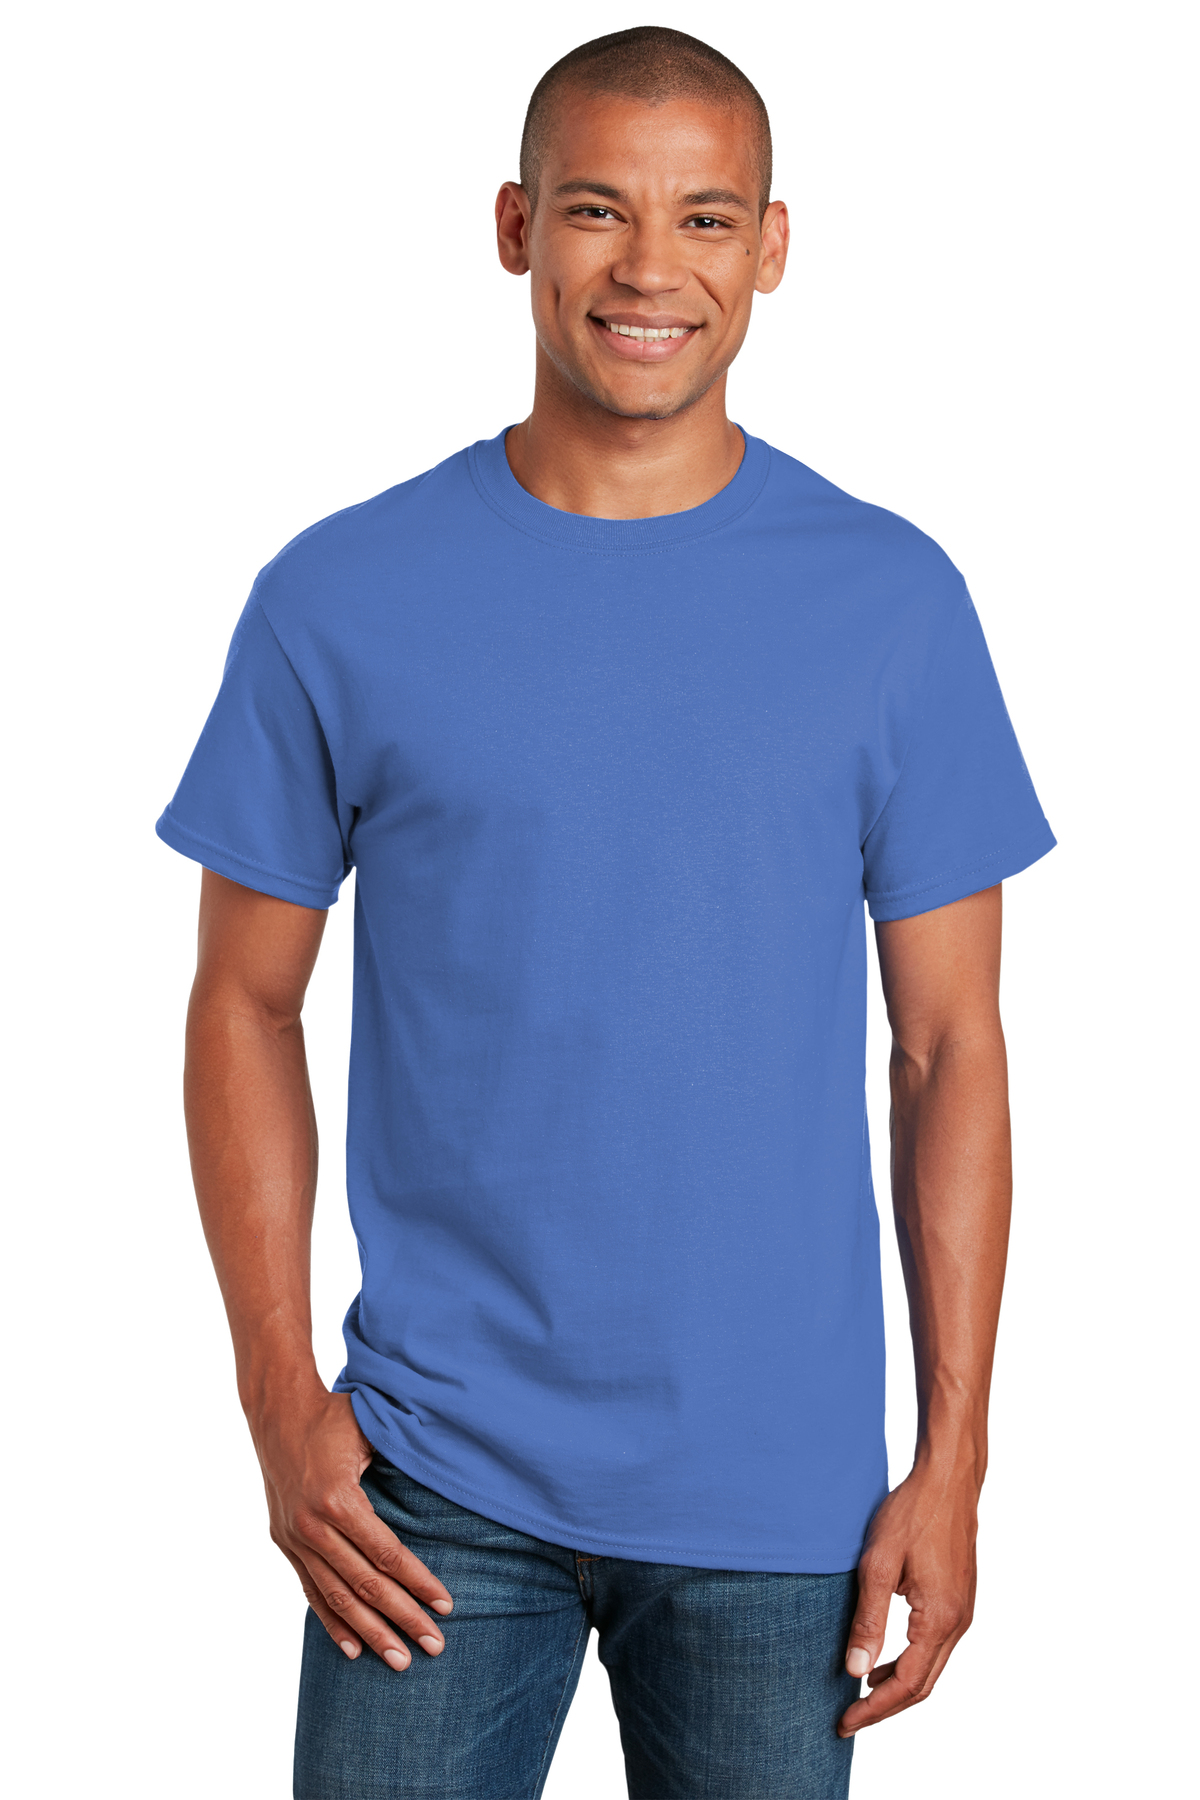 Gildan Embroidered Men's Classic Ultra Cotton Tee | All Products ...